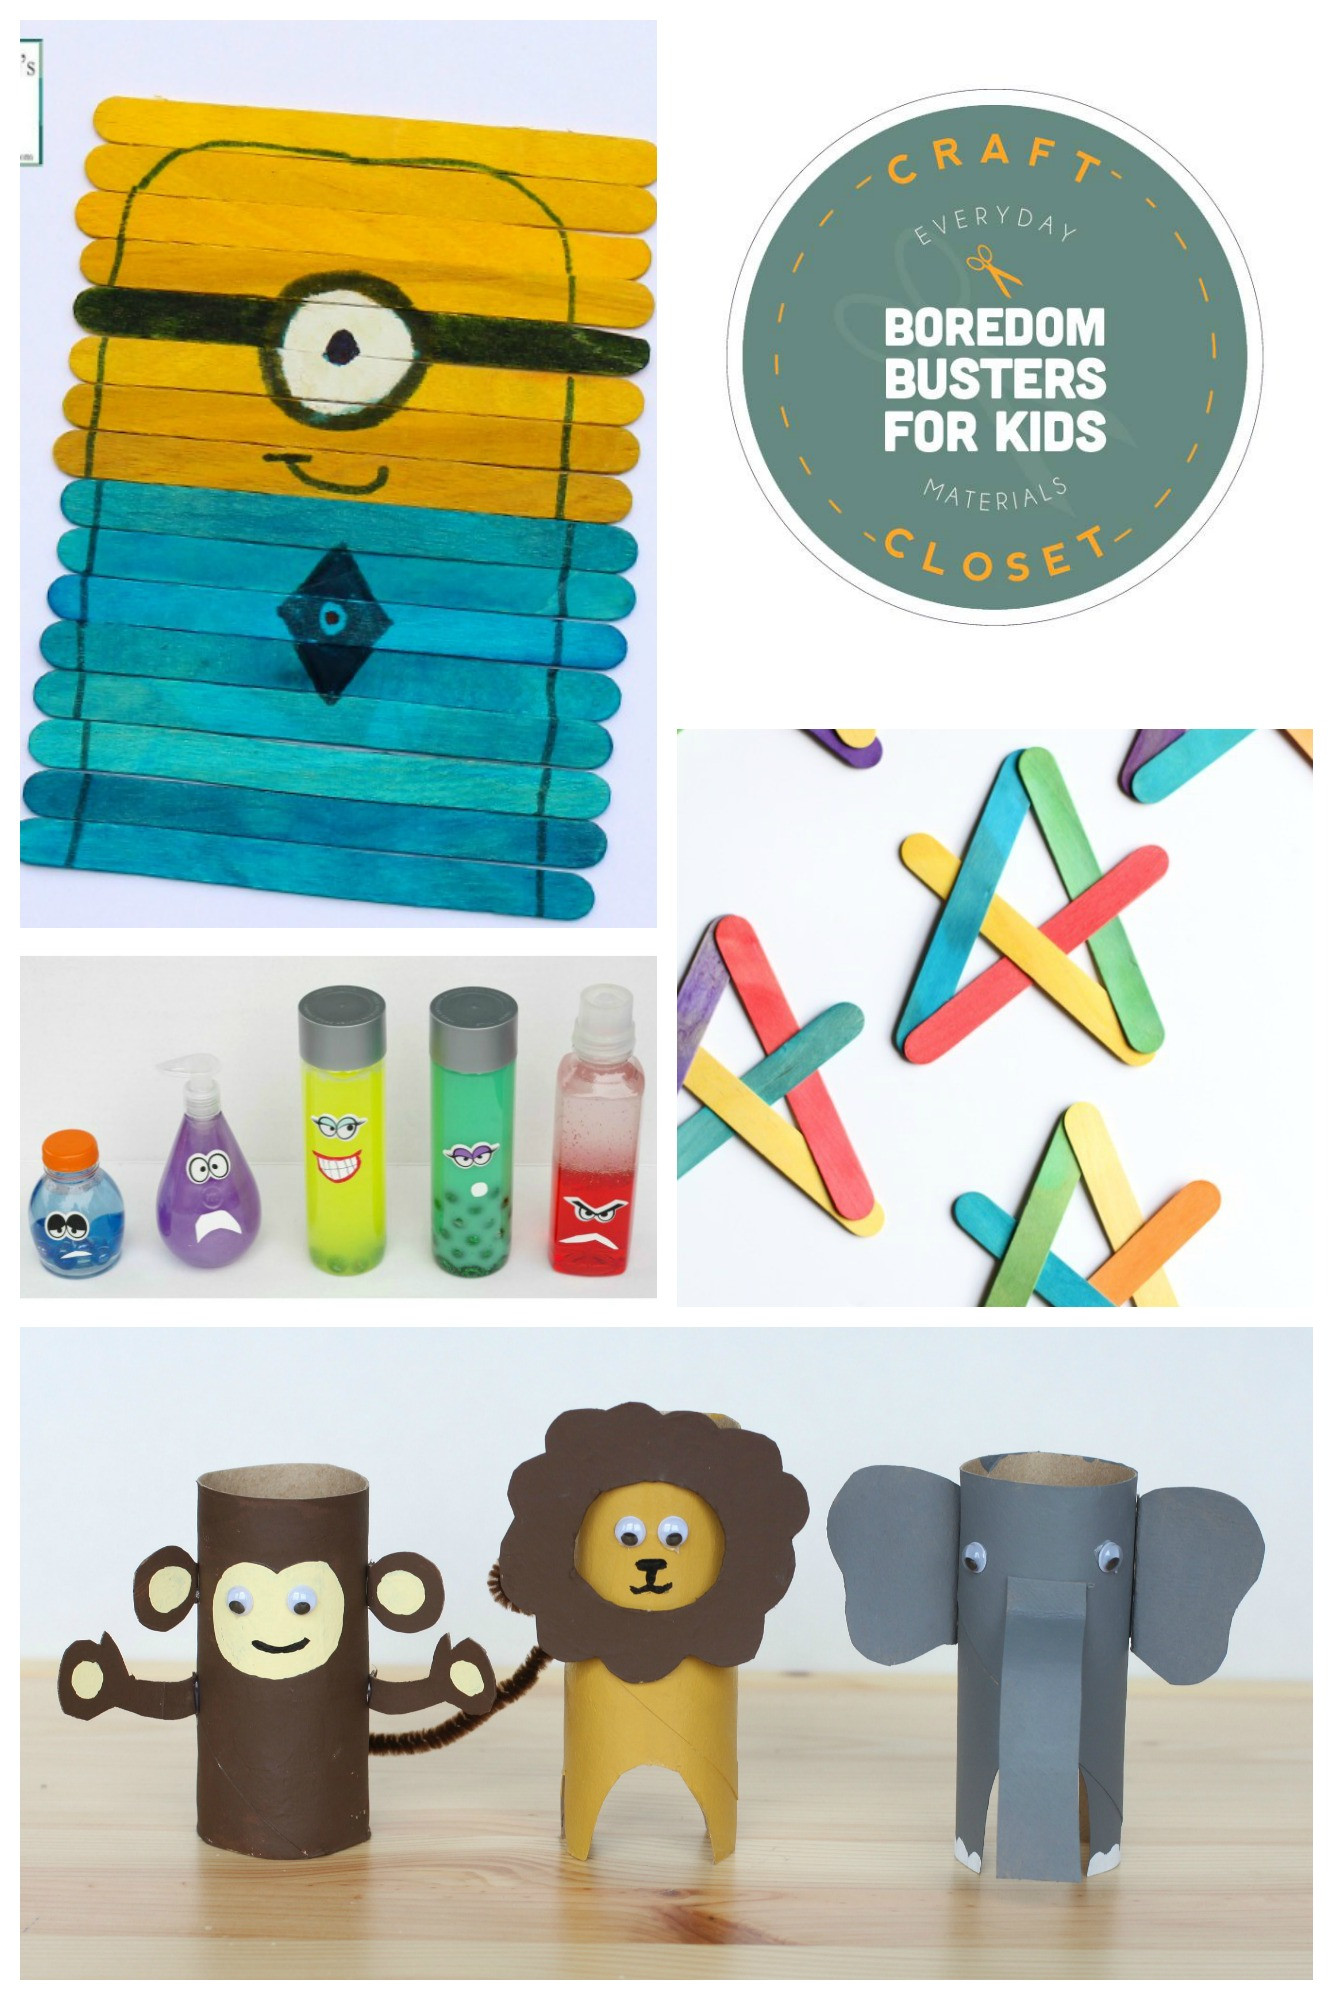 Fun Projects For Kids
 25 Crafts and Activities for Kids Using Everyday Materials